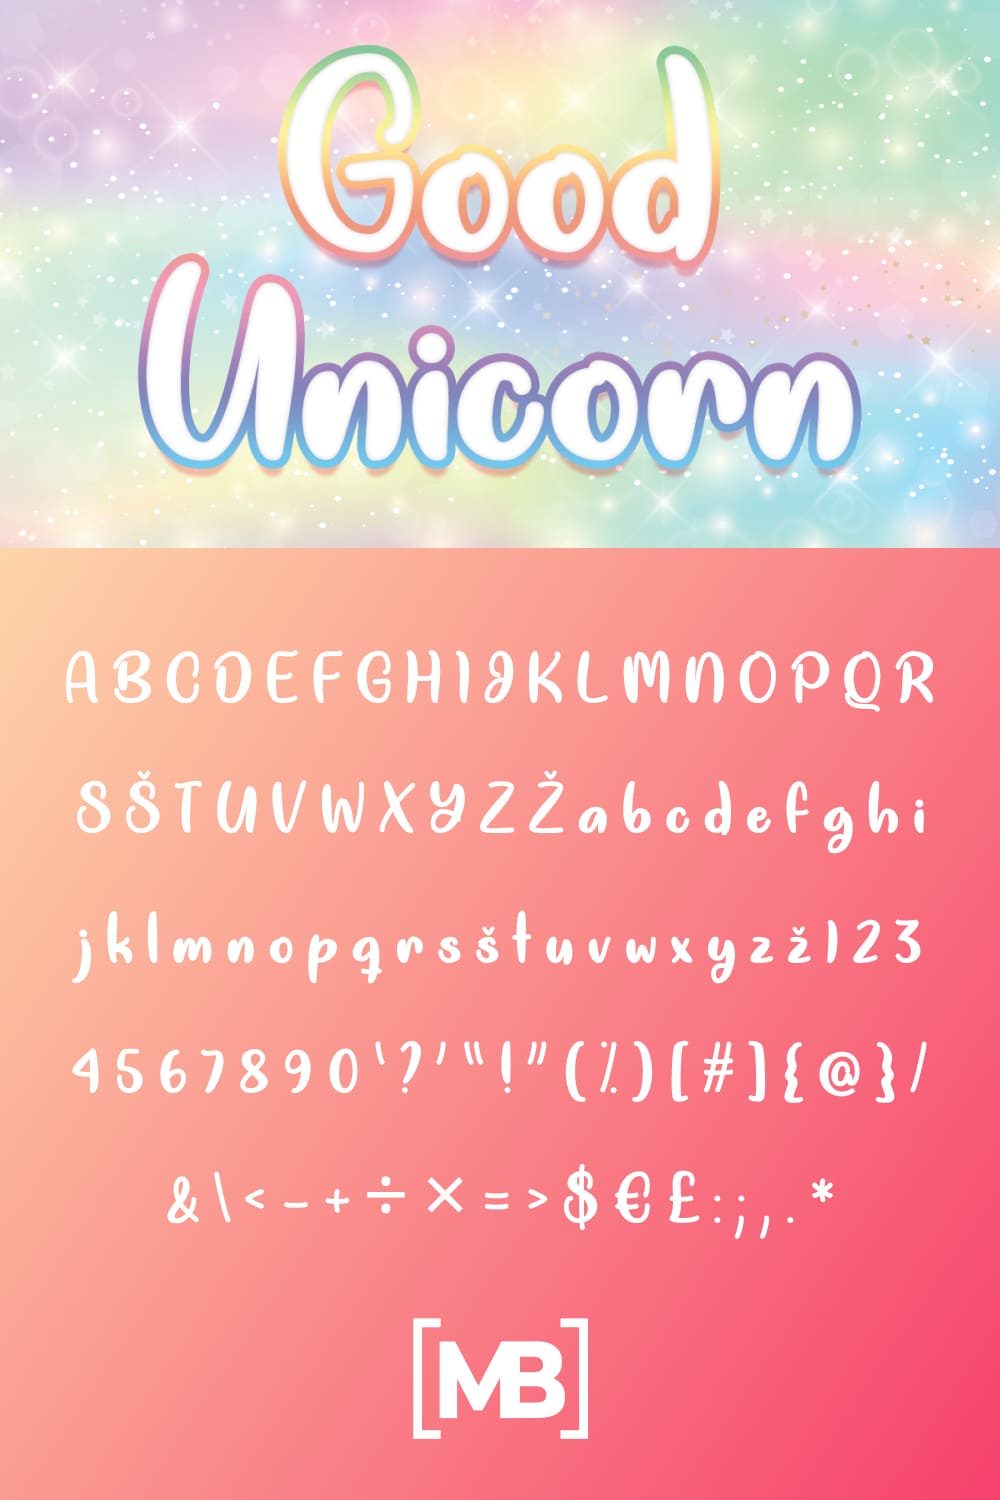 The font is like a rainbow - colorful and mysterious.